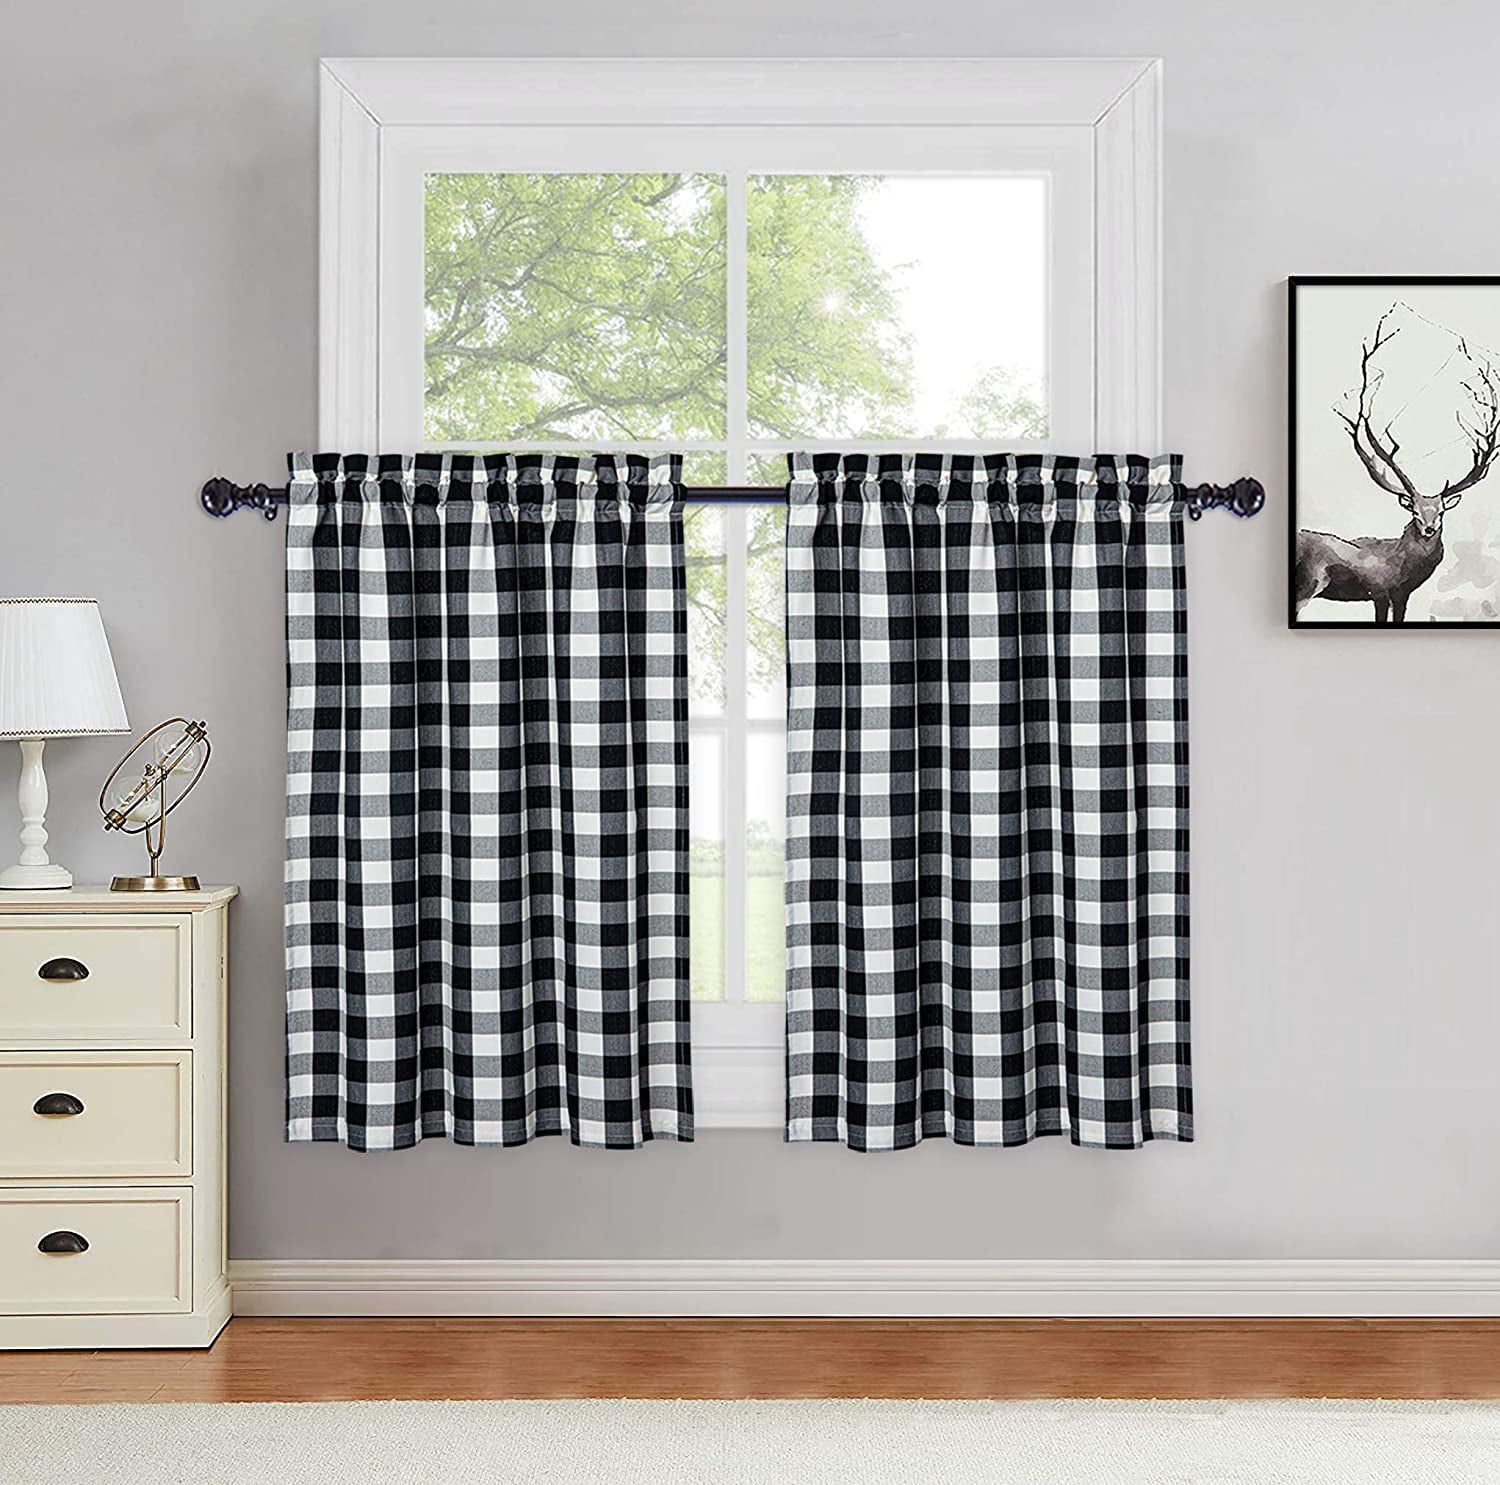 2 Pack Kitchen Curtains Cotton Black And White Buffalo Checker Bathroom Window Curtain 27x36 Inches Length Farmhouse Plaid Gingham Yarn Dyed Cafe Half Treatment Set Small Com